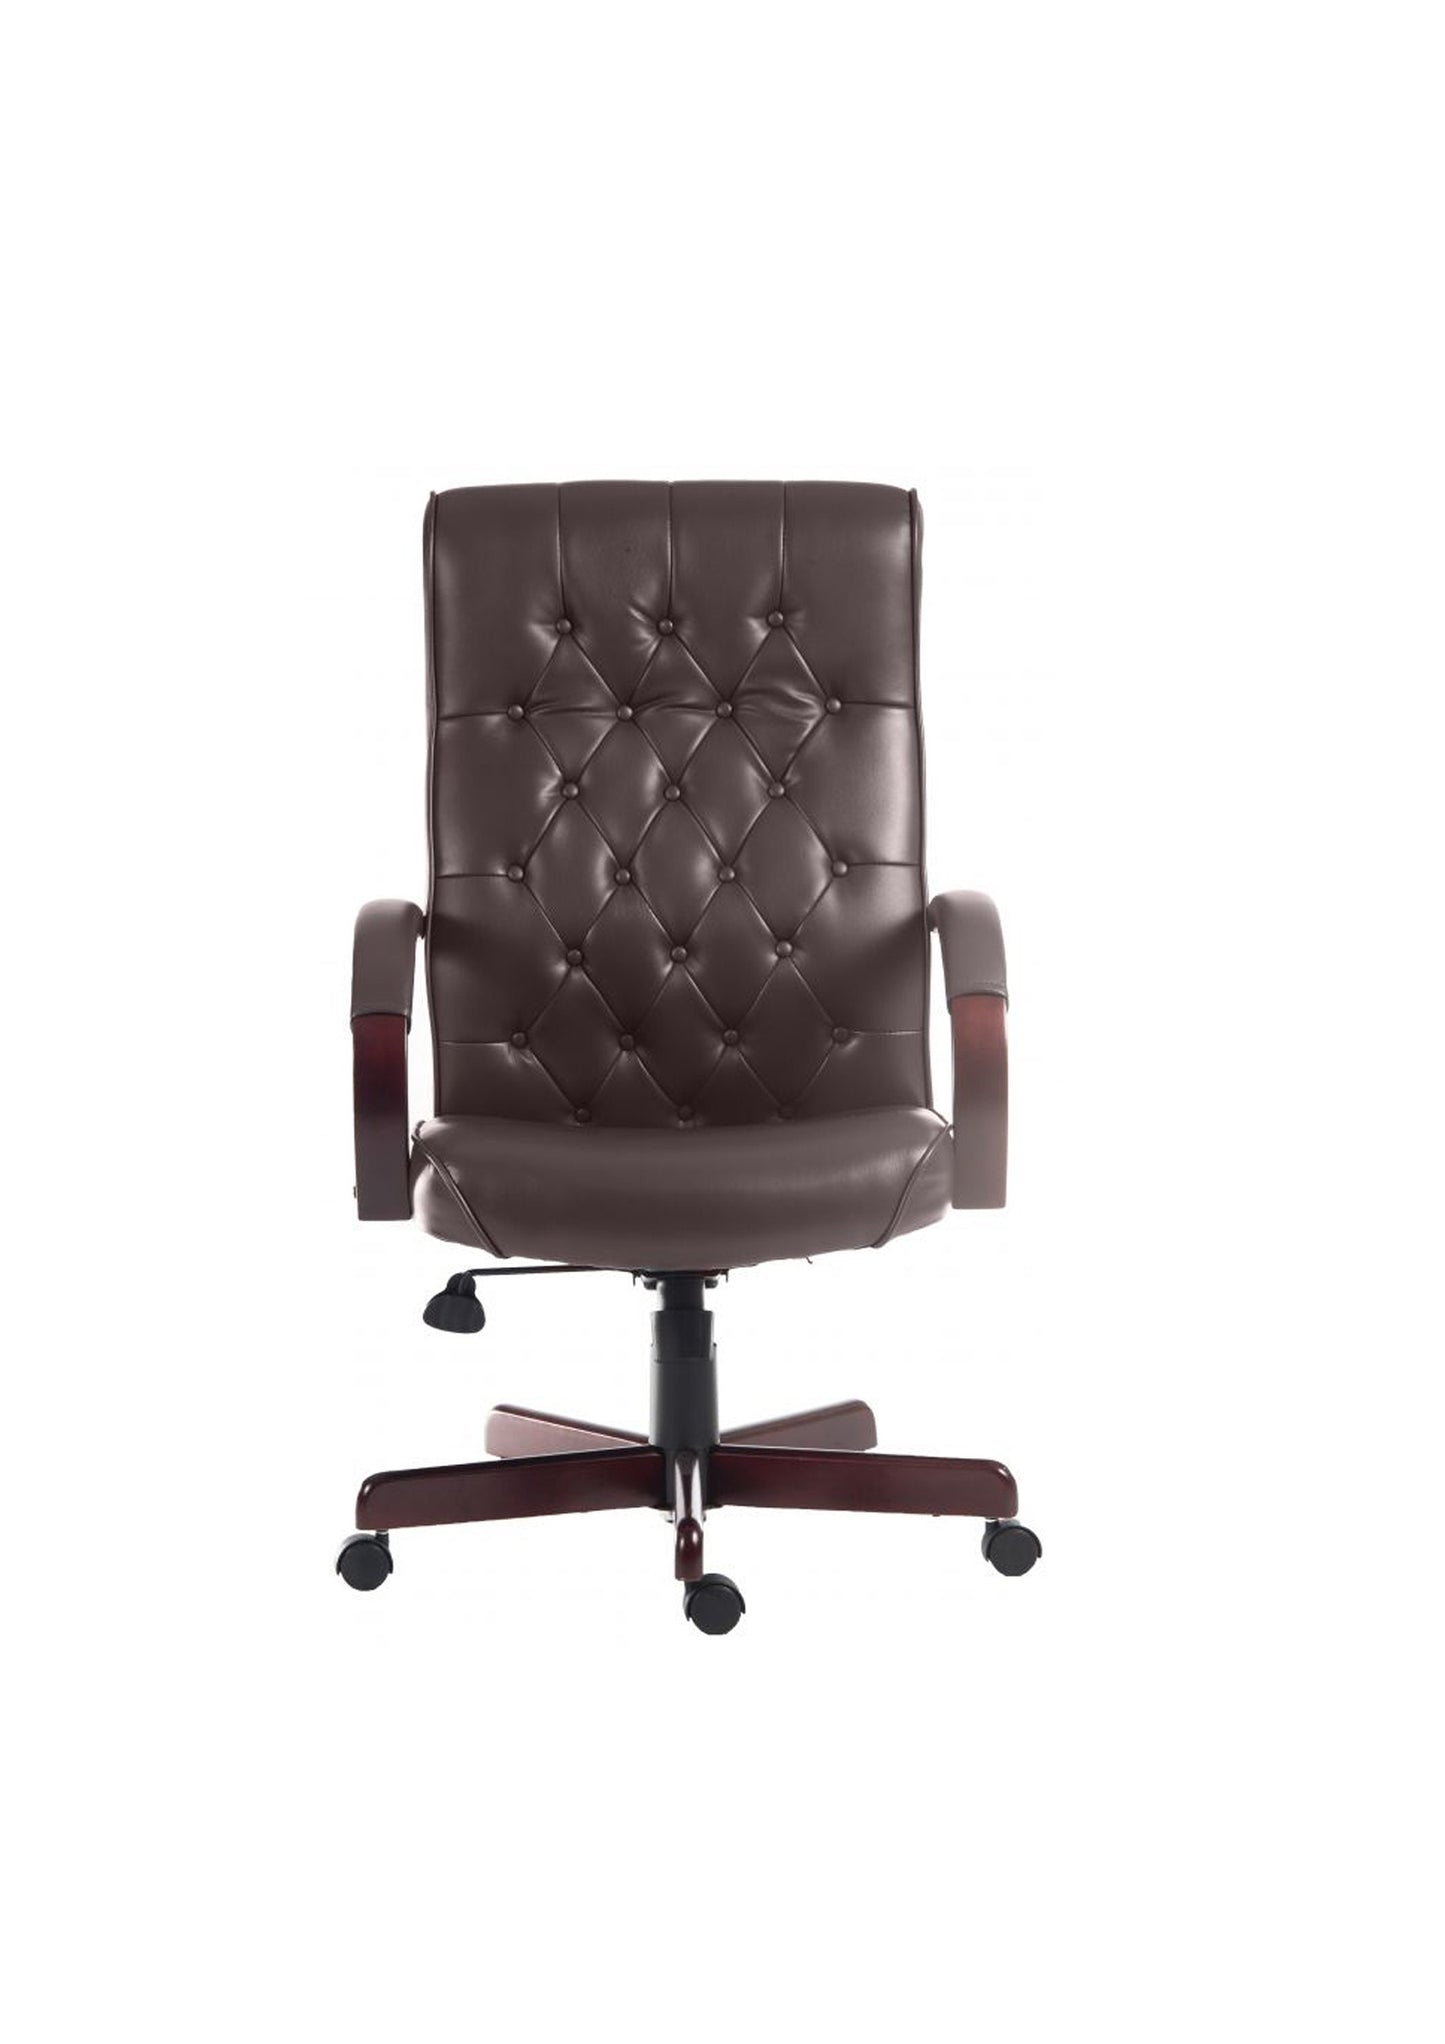 Traditional bonded leather faced executive armchair in Brown, Burgundy, Green